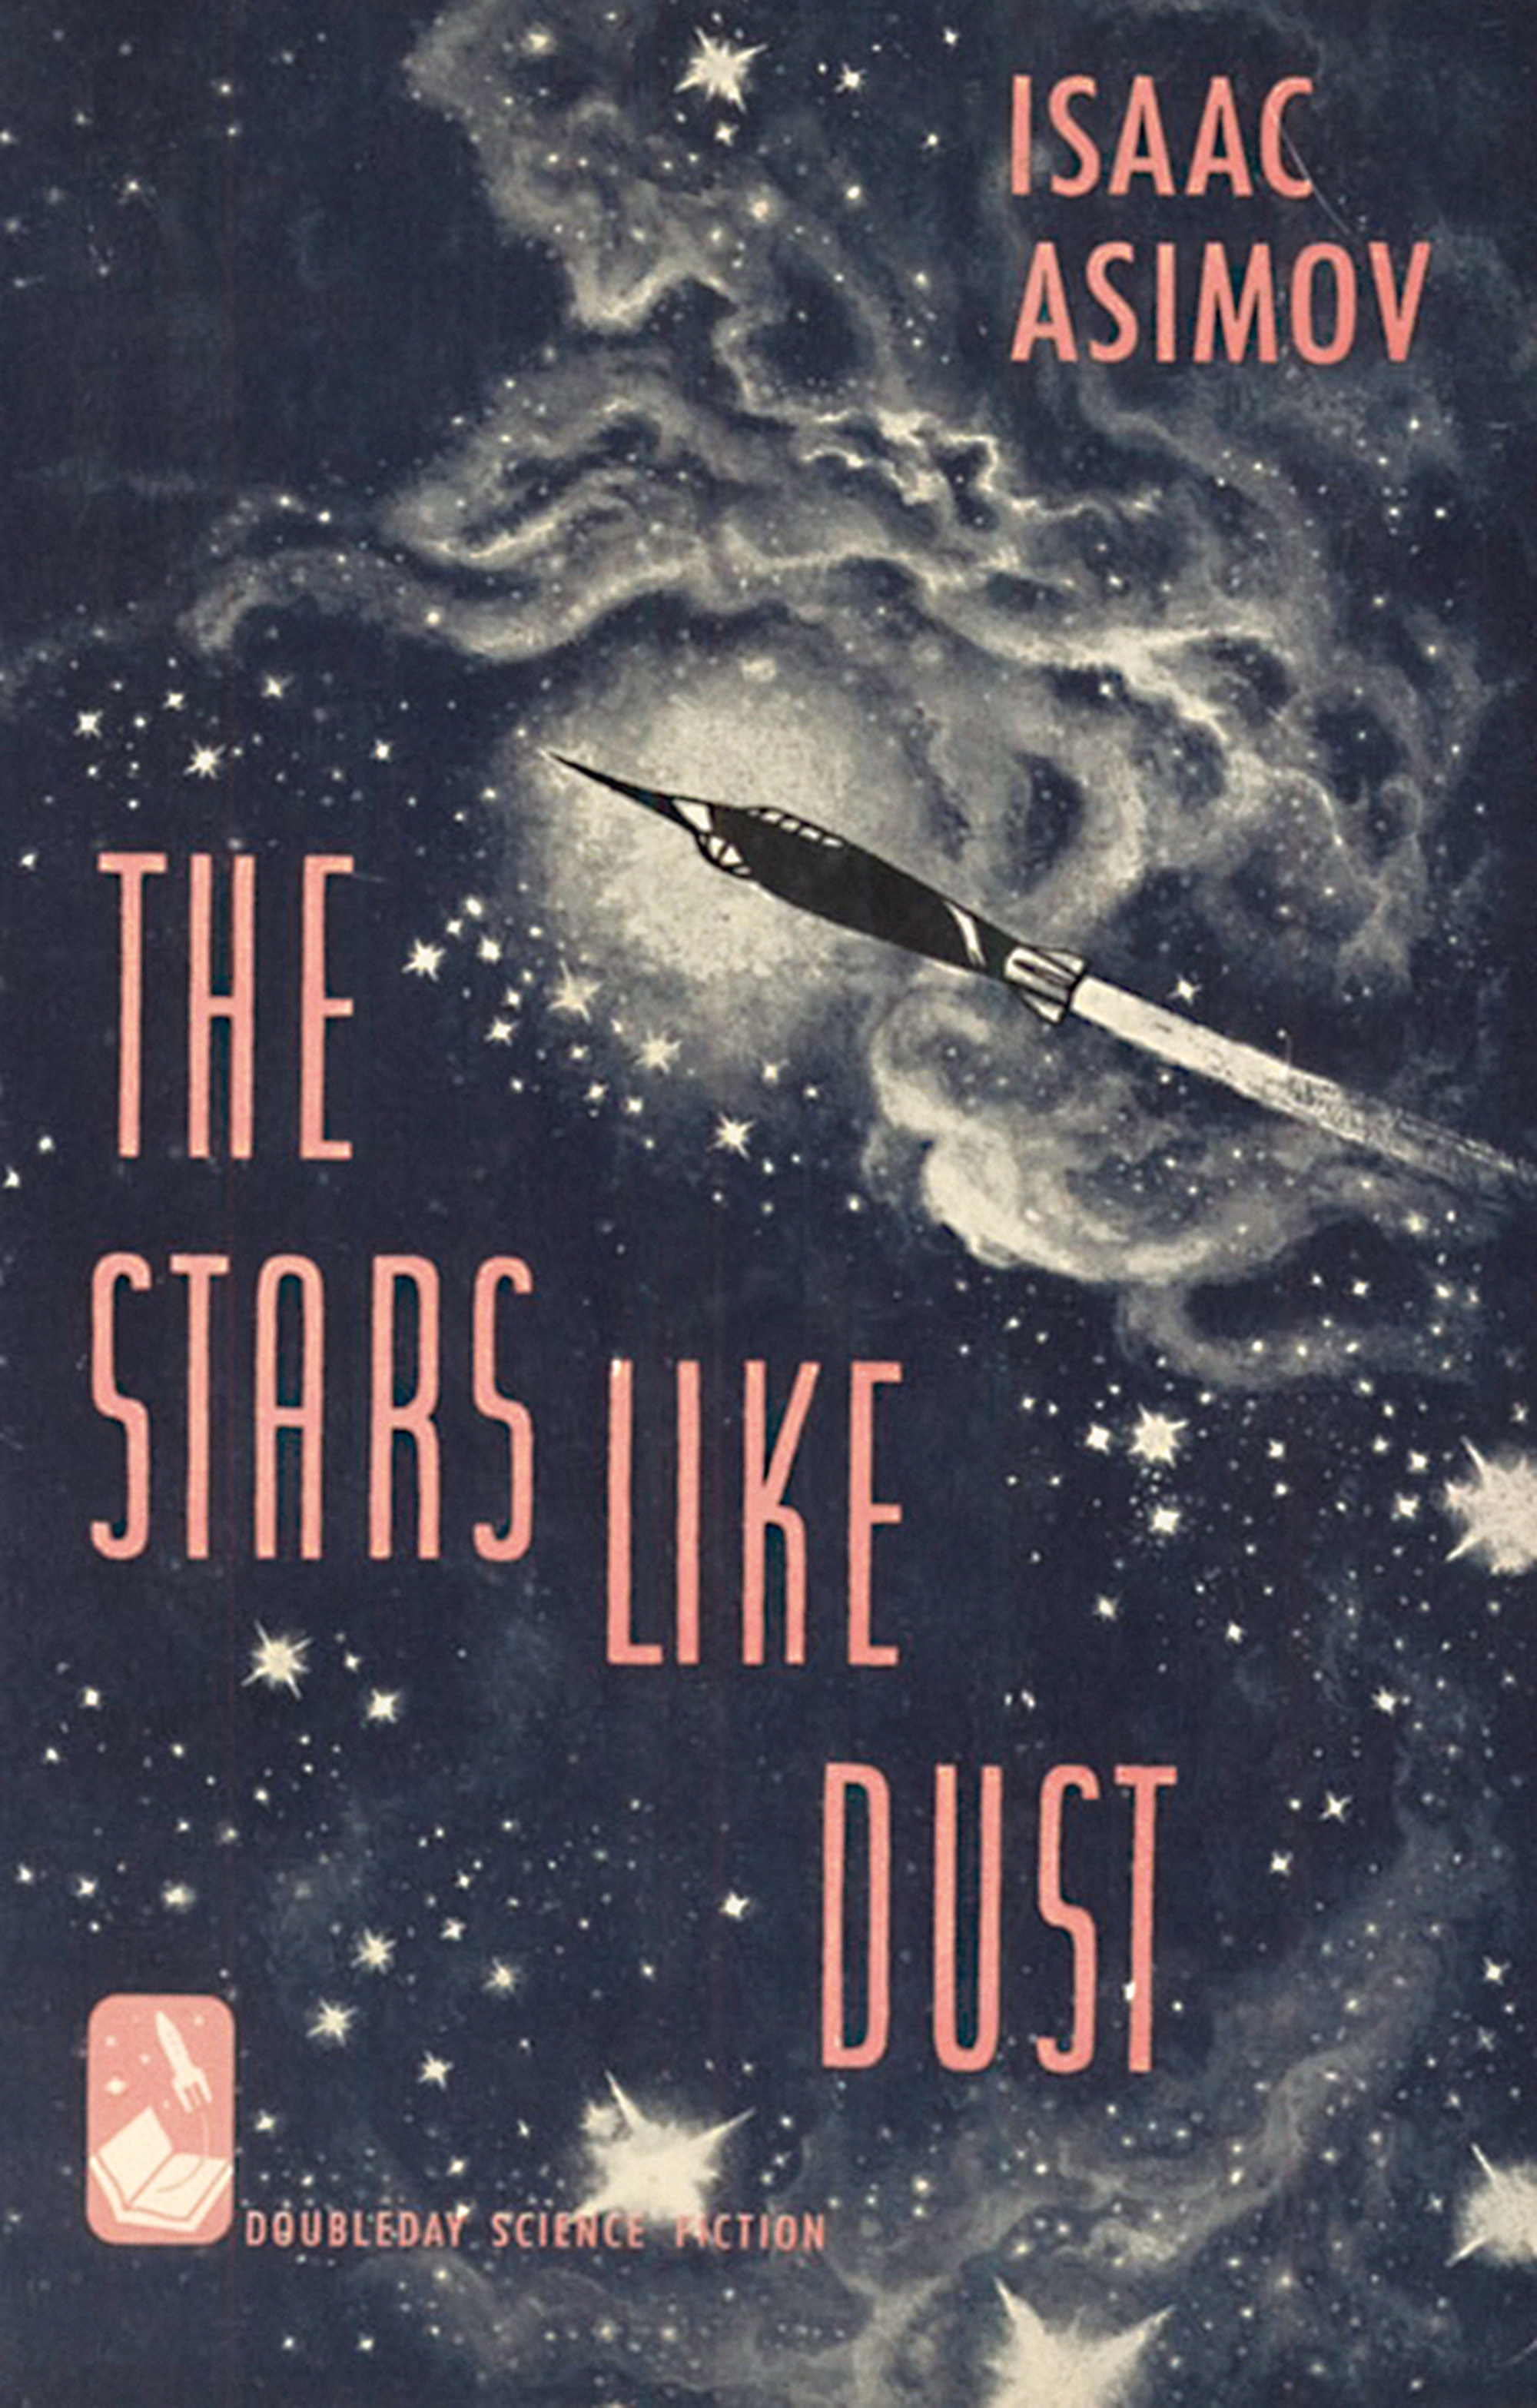 The cover illustration for a Doubleday edition of Isaac Asimov’s “The Stars Like Dust” — it shows a rocket in space. 